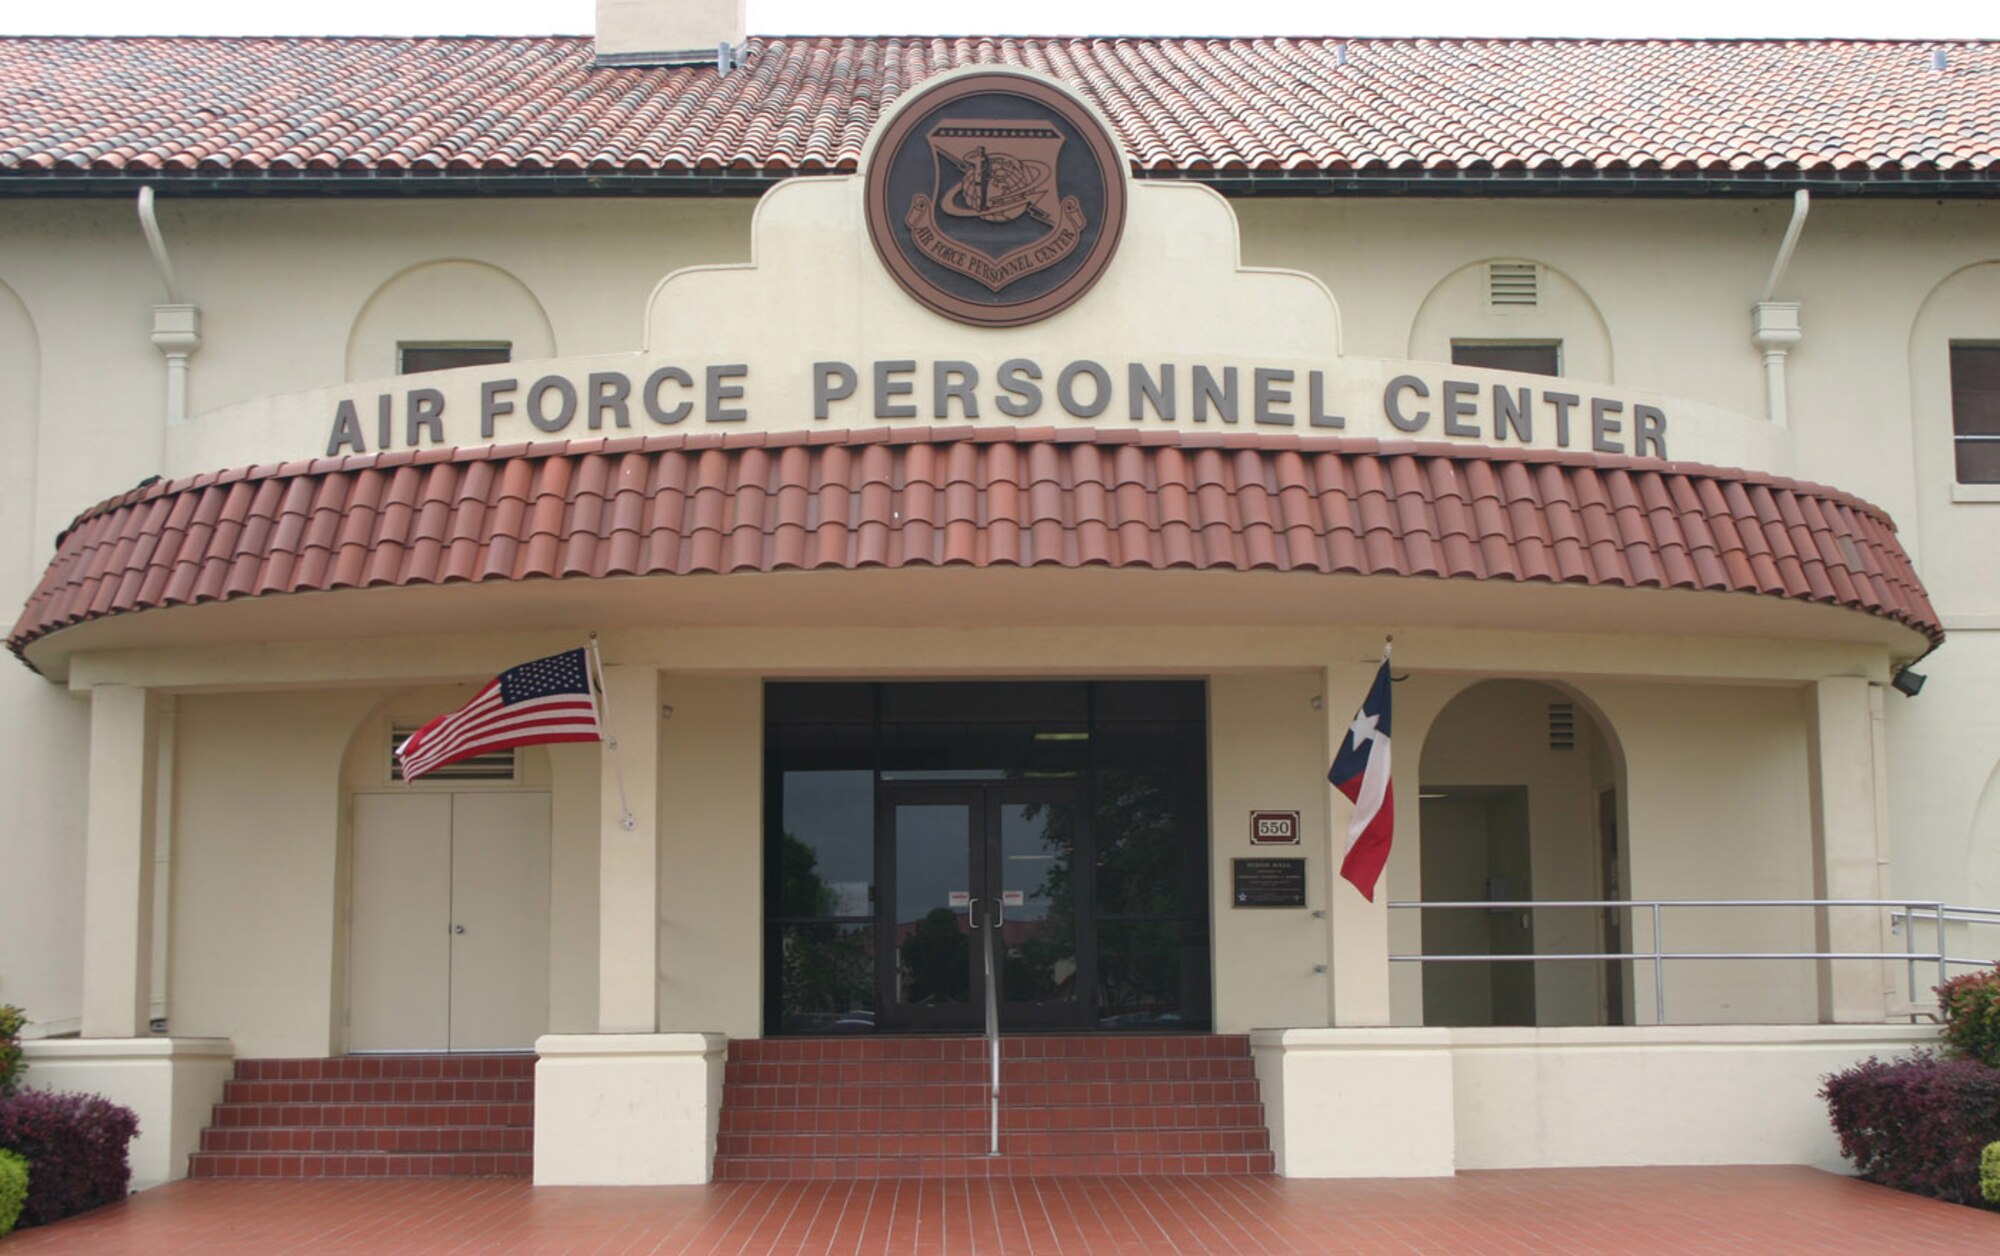 RANDOLPH AIR FORCE BASE, Texas -- the main entrance to Dixon Hall, home of the Air Force Personnel Center here. (Courtesy photo)